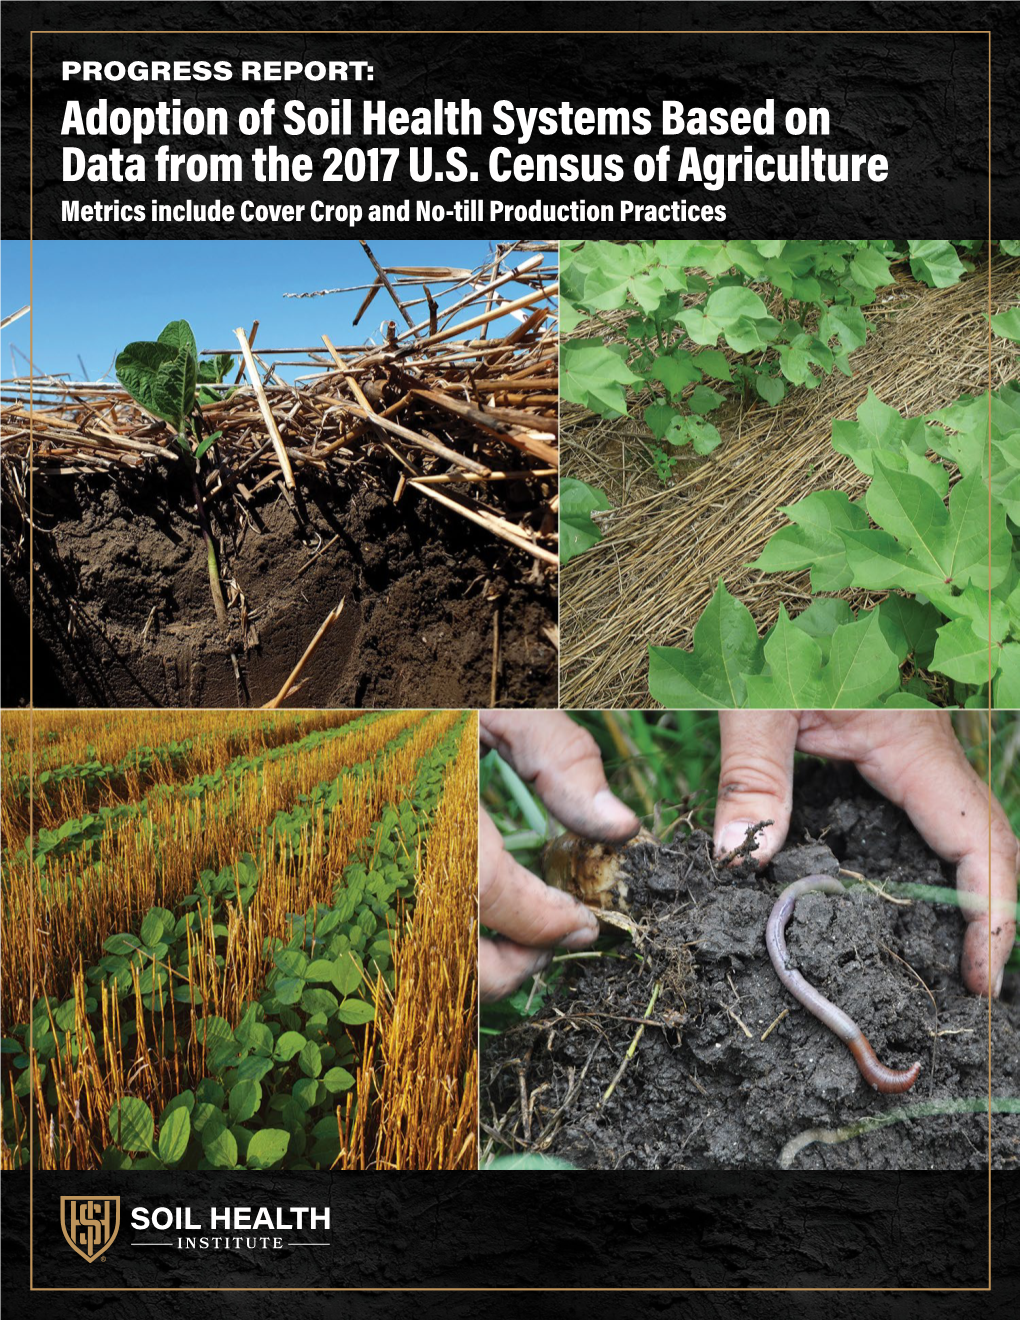 Adoption of Soil Health Systems Based on Data from the 2017 U.S. Census of Agriculture Metrics Include Cover Crop and No-Till Production Practices